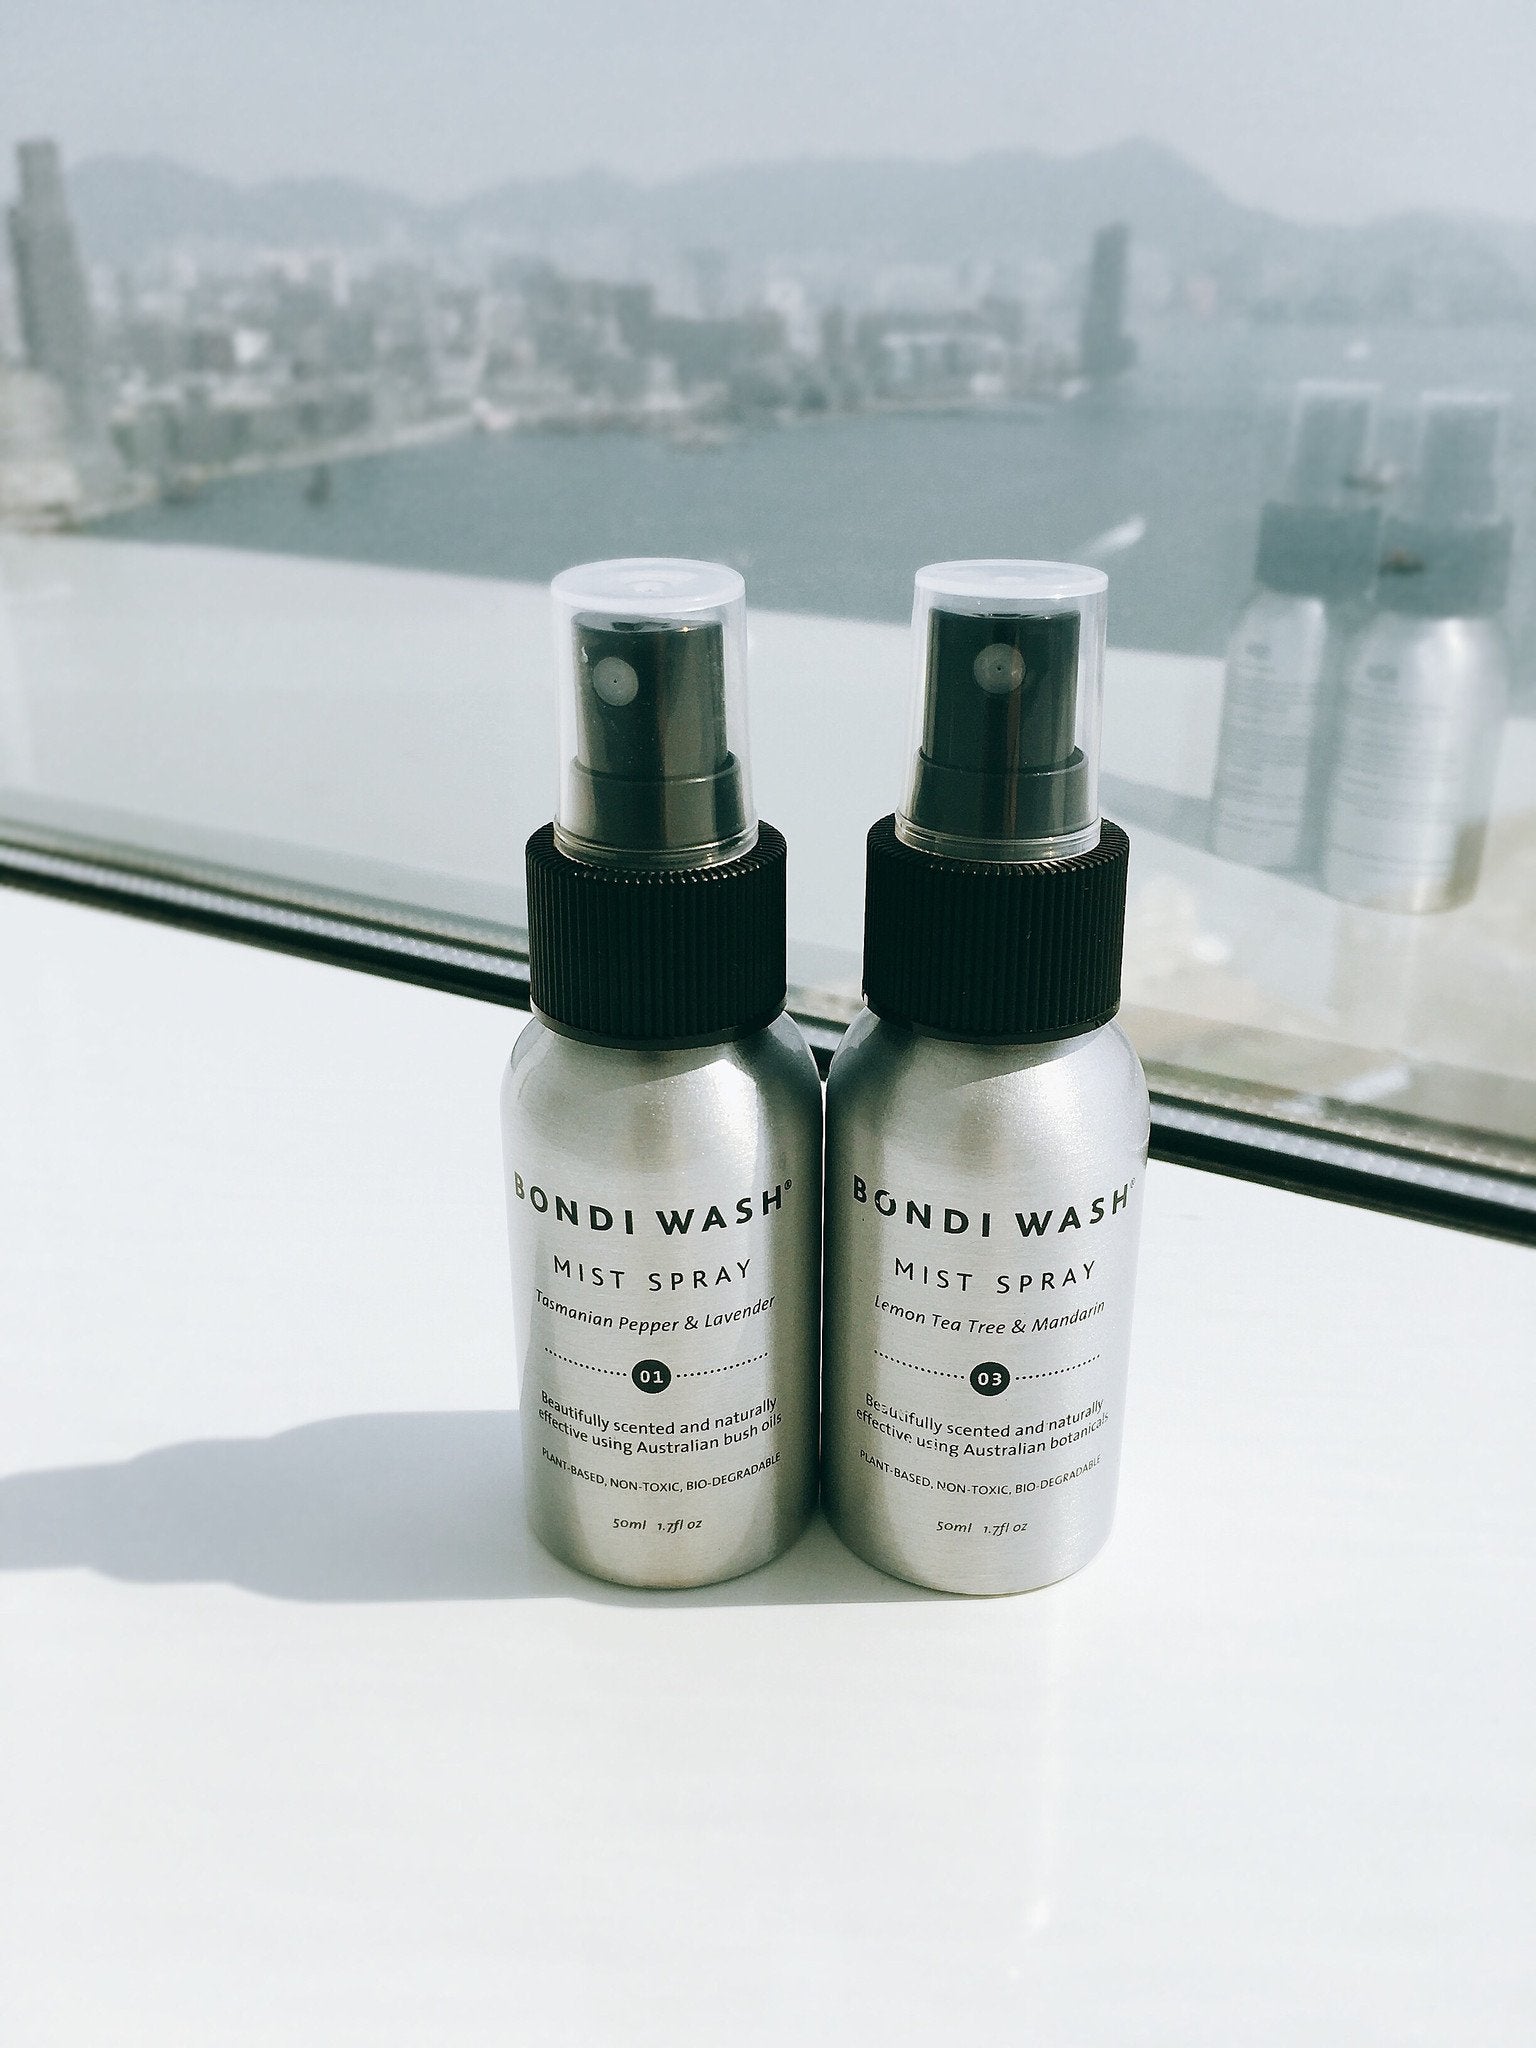 Bondi Wash, Mist Spray, Multi Purpose Mist Spray, australian botanicals, home & cleaning, eco clean, sustainable living, home care, natural mist spray, refreshing, toxic free, cleaning, Tasmanian Pepper & Lavender